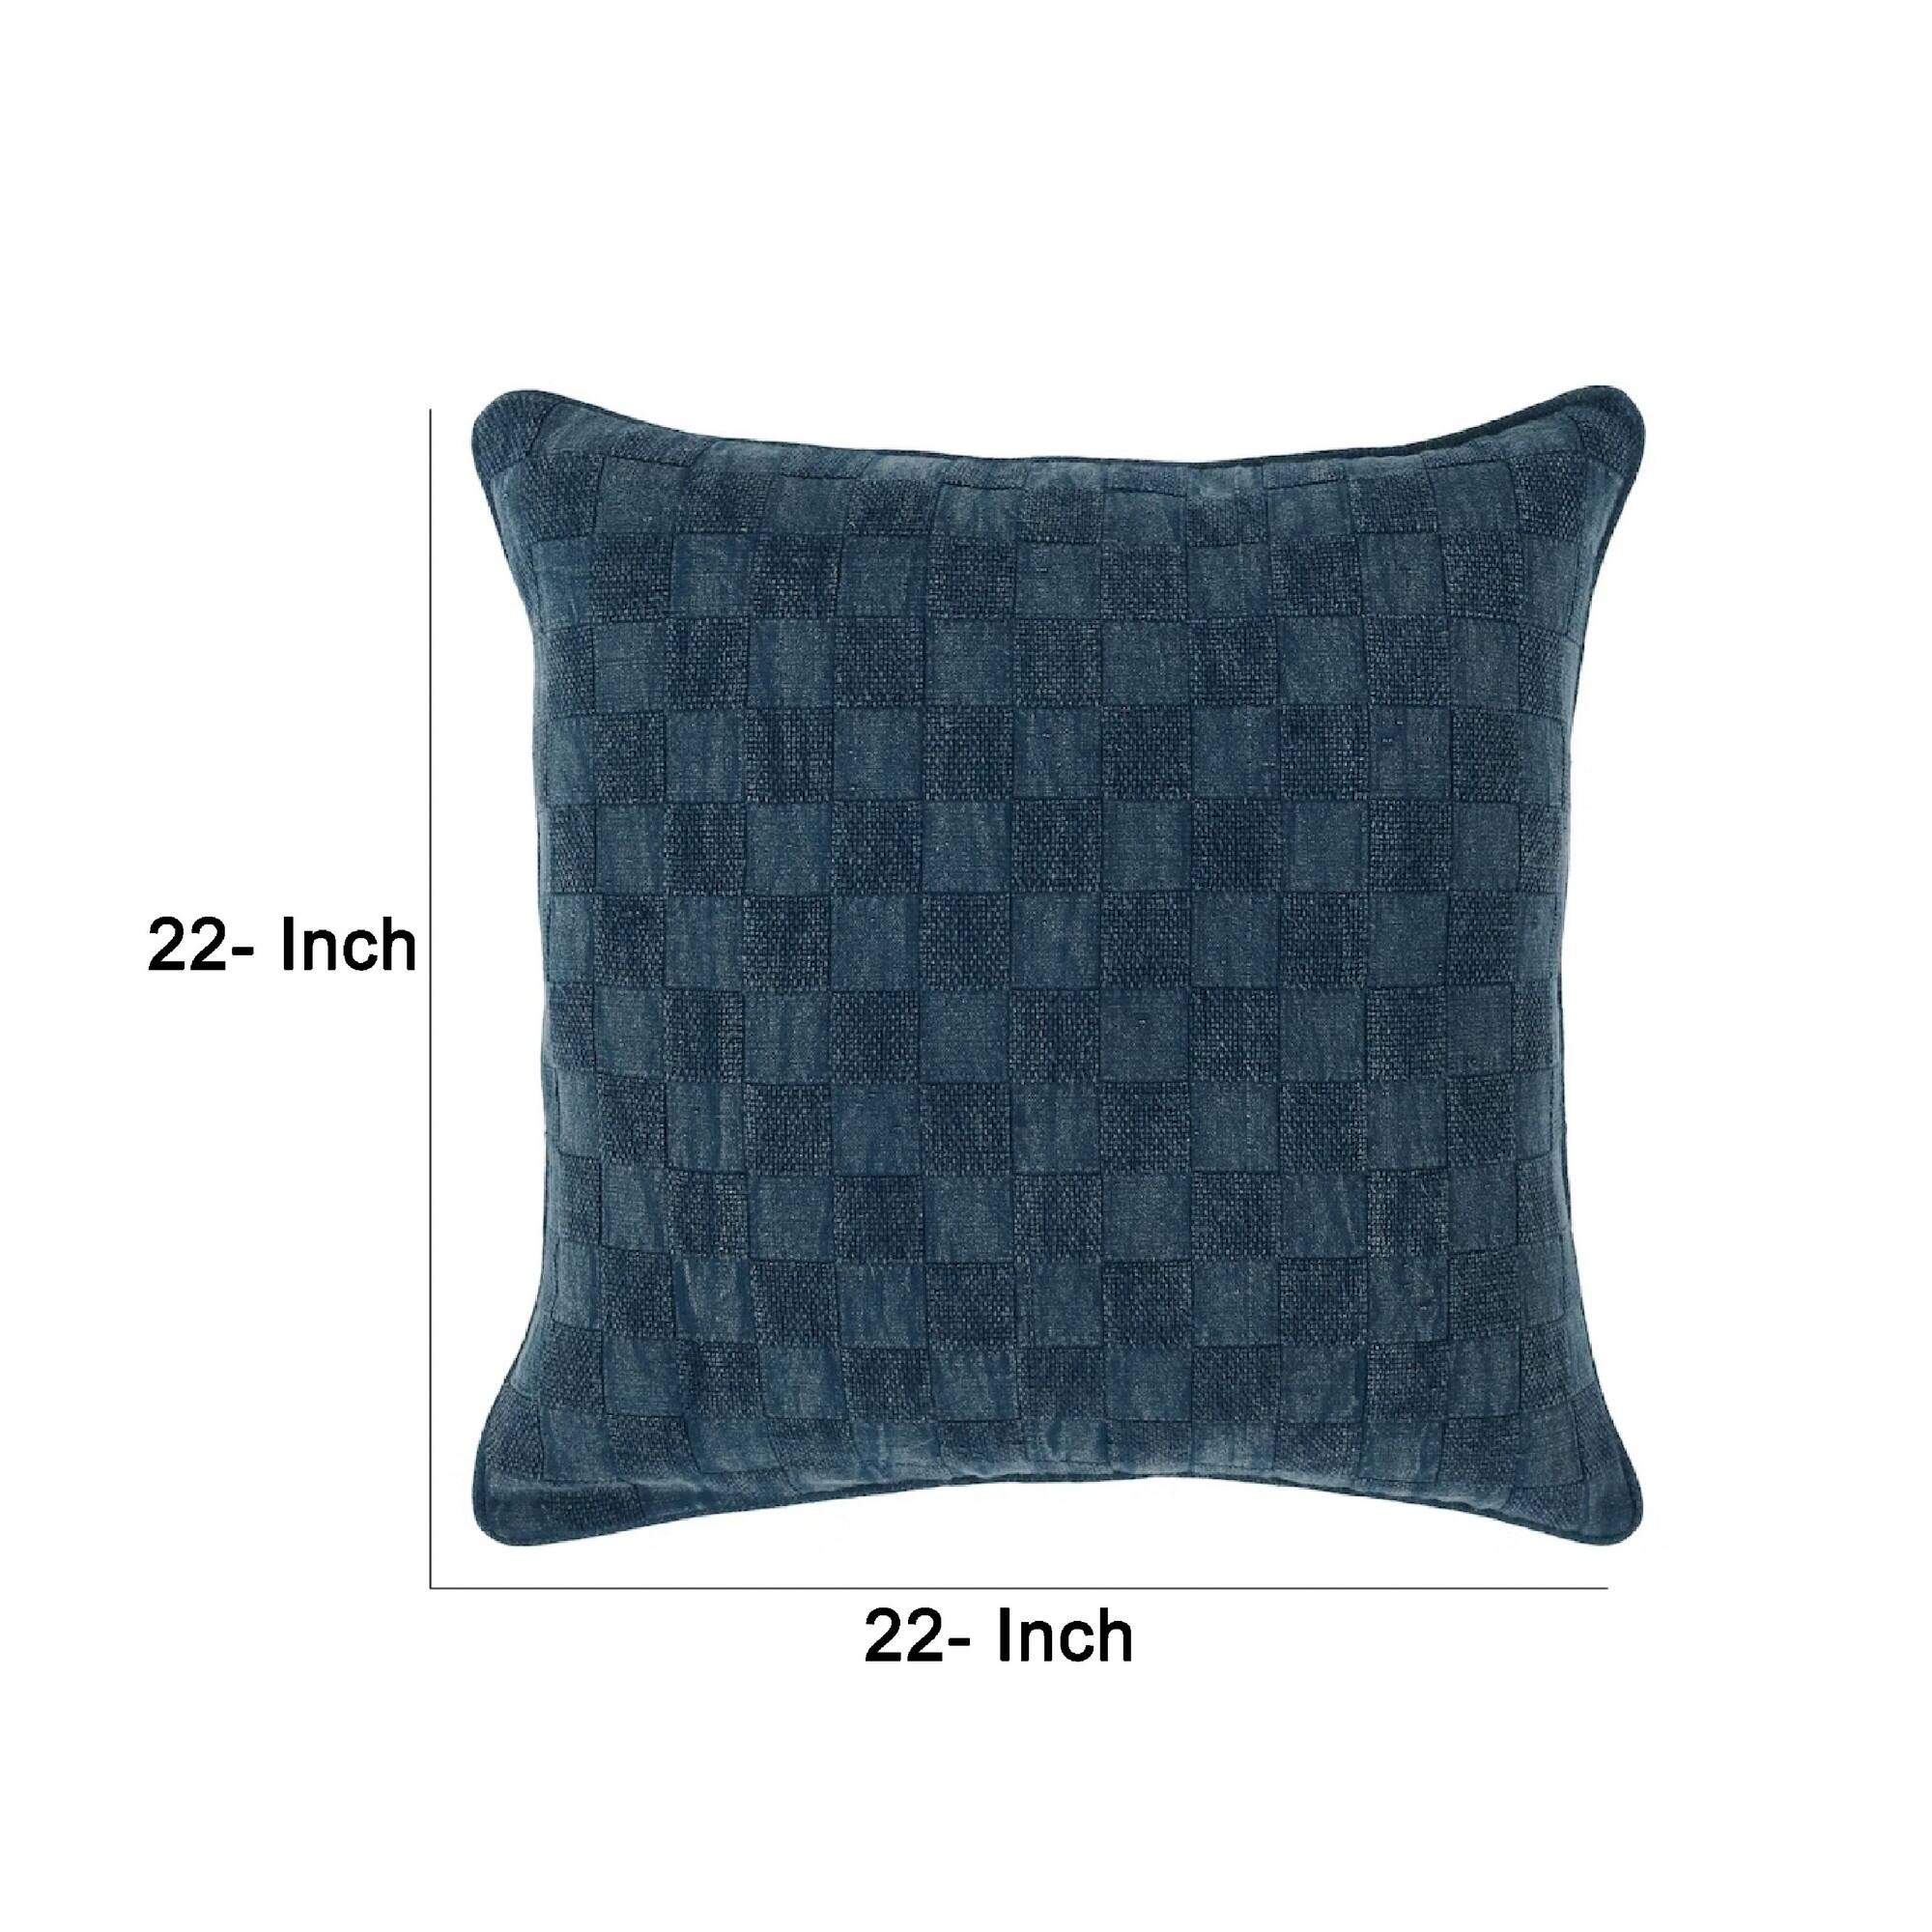 Giana 22 x 22 Square Accent Throw Pillow, Checkered Pattern, Navy Blue